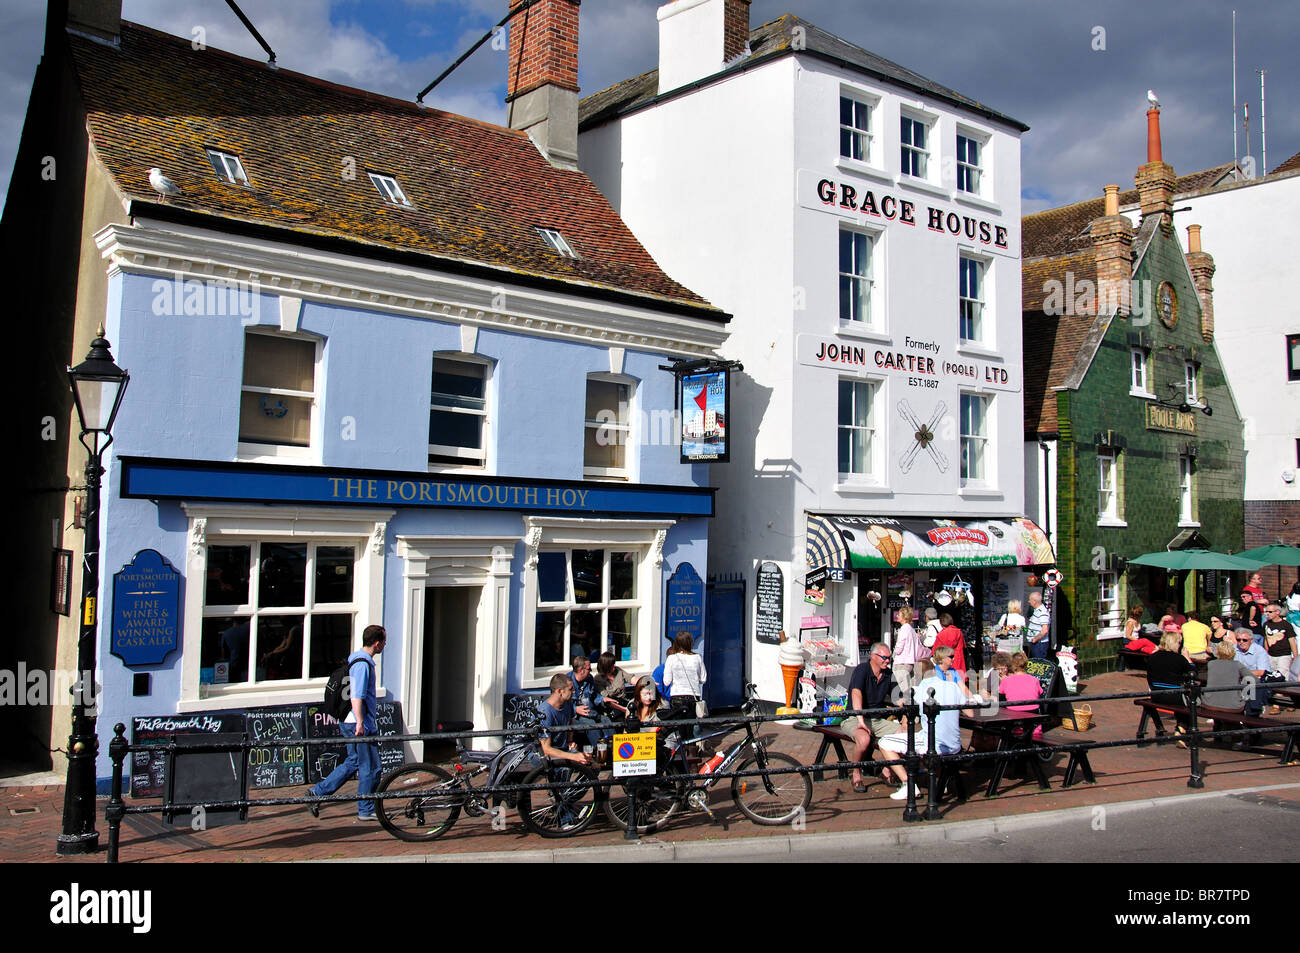 Waterfront shop and pubs, The Quay, Poole, Dorset, England, United Kingdom Stock Photo